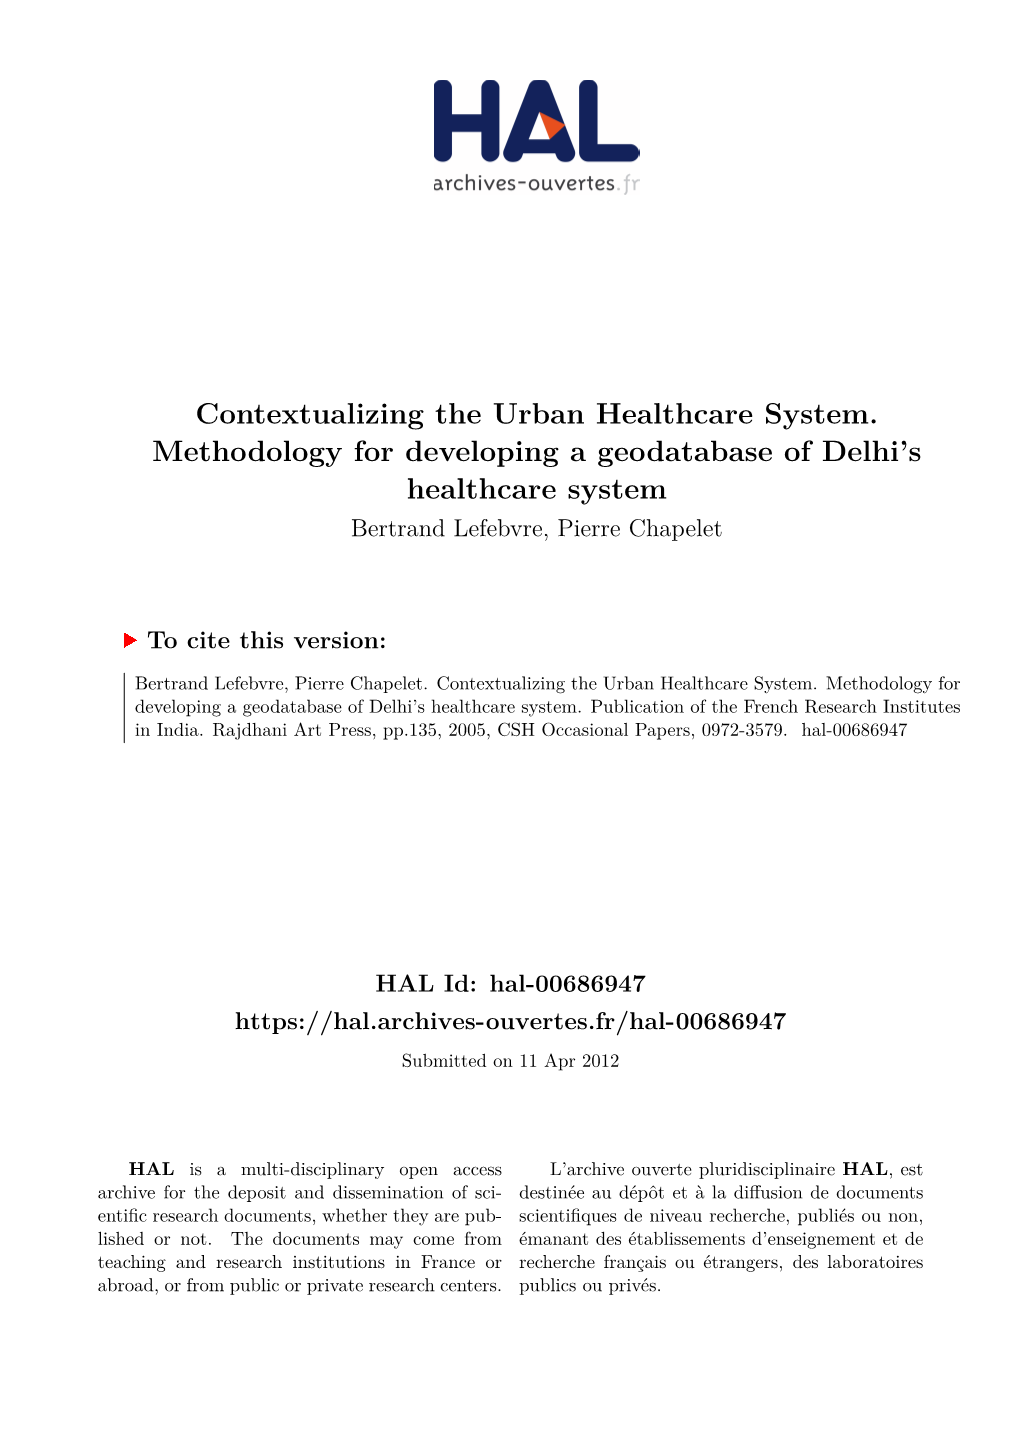 Contextualizing the Urban Healthcare System. Methodology for Developing a Geodatabase of Delhi’S Healthcare System Bertrand Lefebvre, Pierre Chapelet